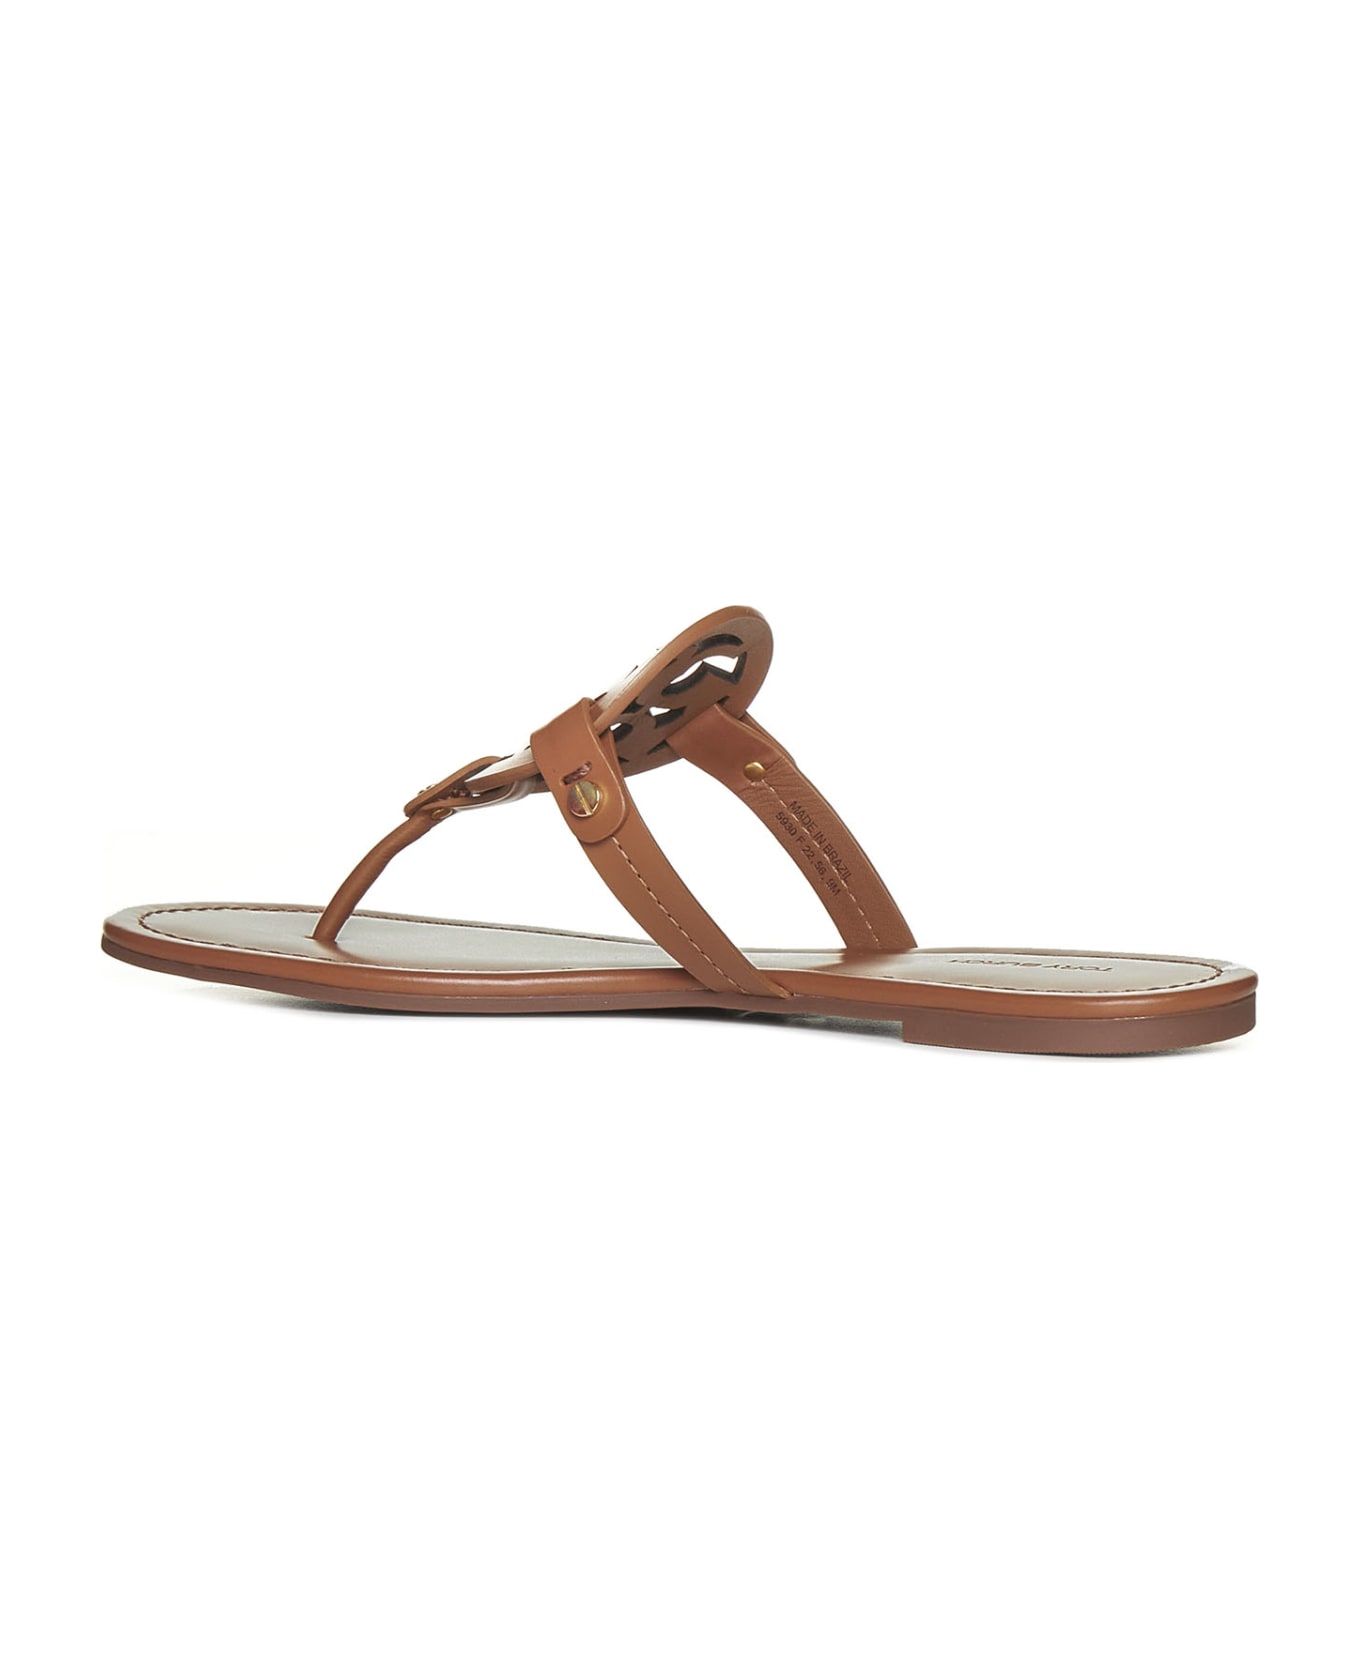 Tory Burch Miller Leather Sandals - Saddle Brown